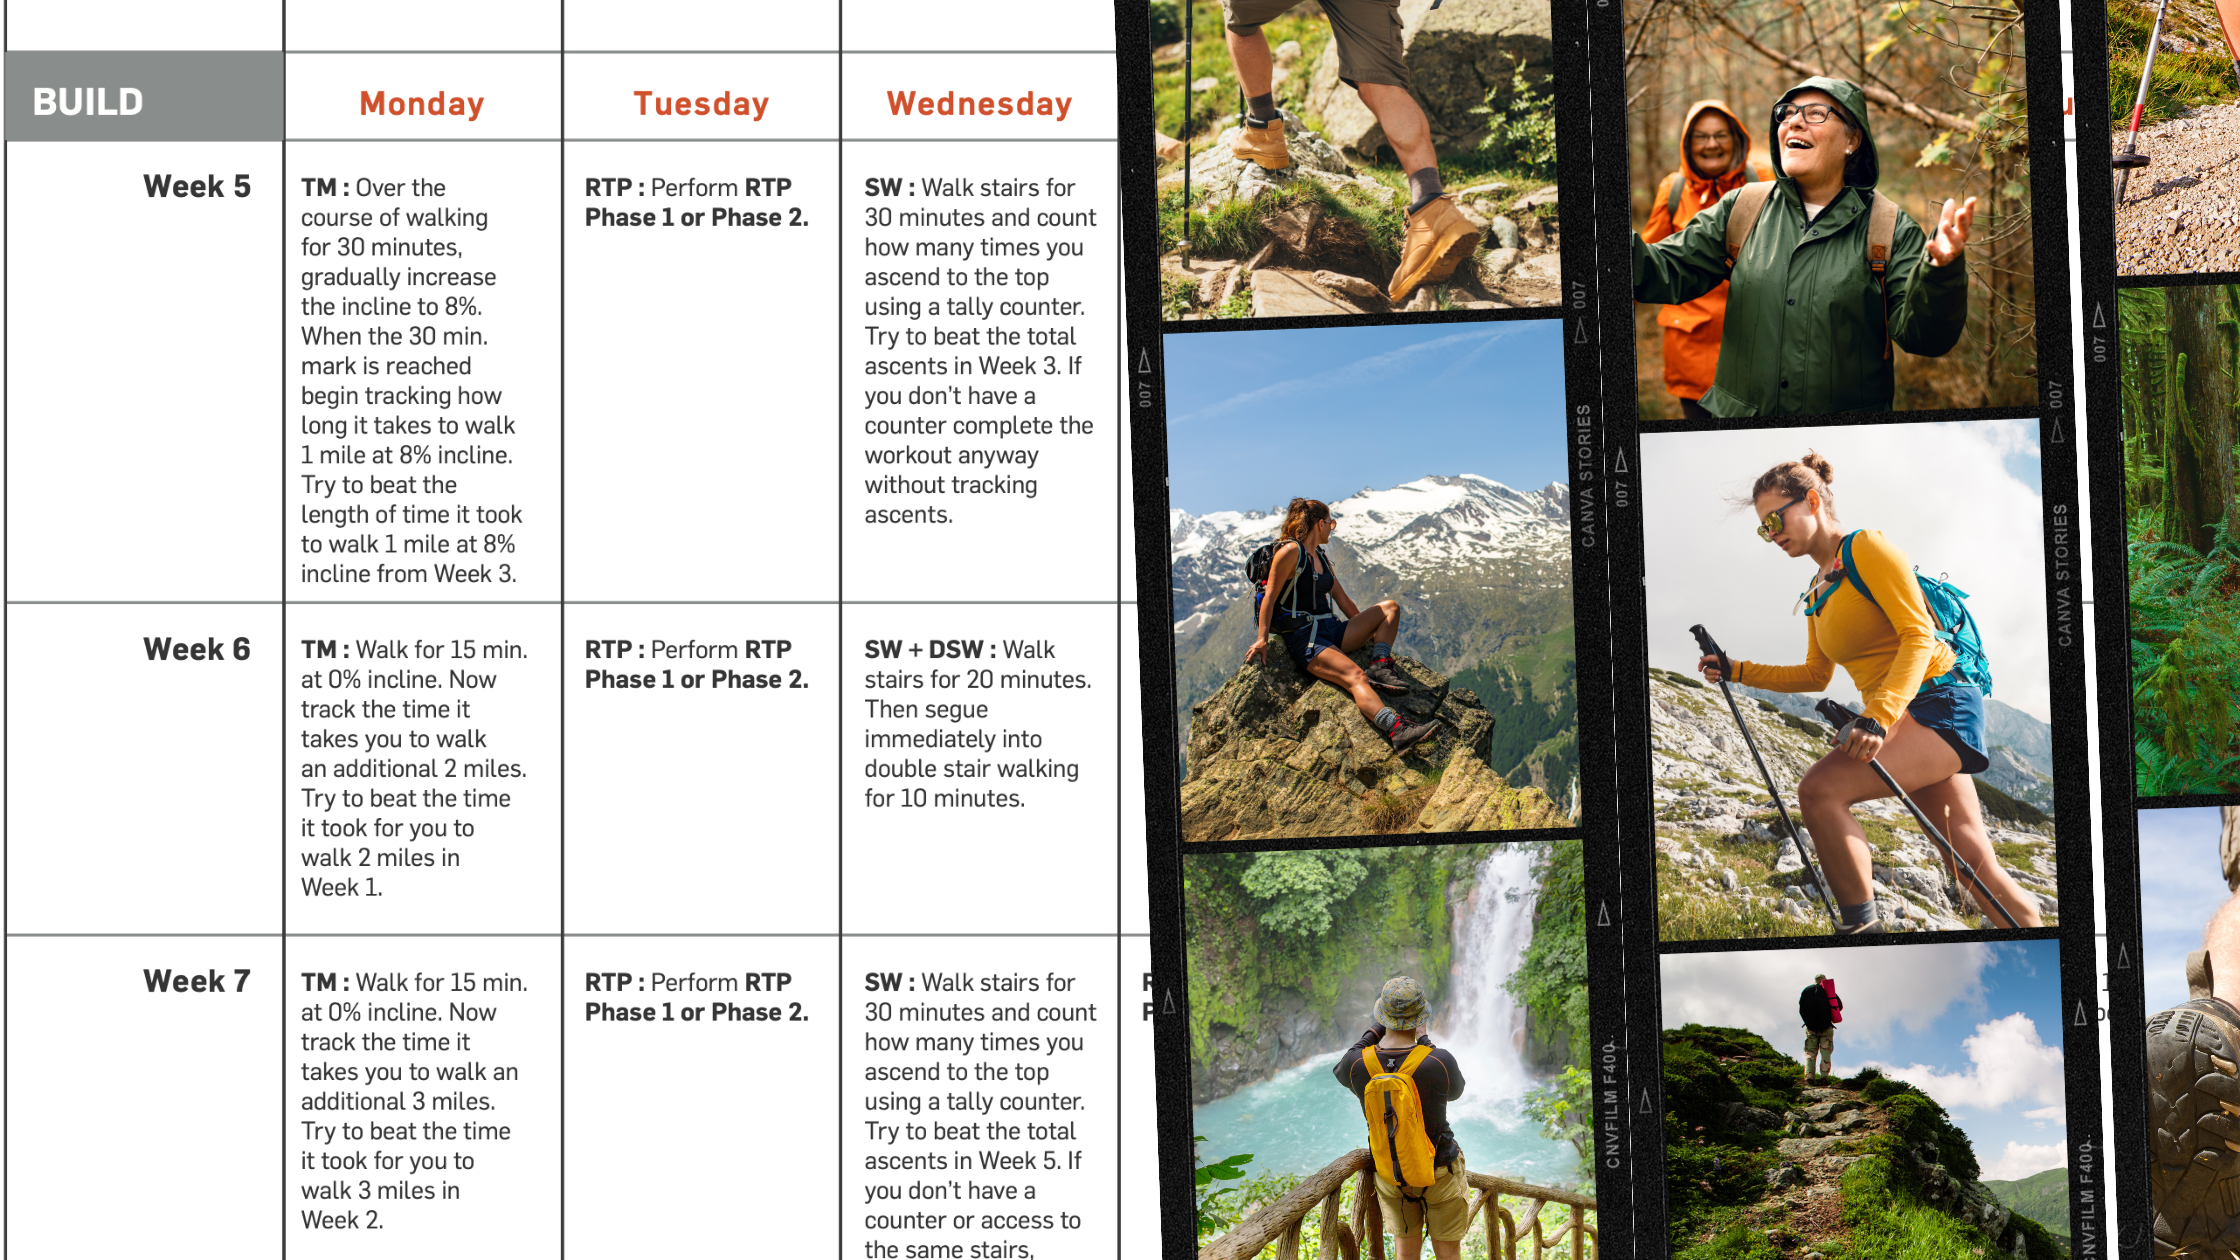 Hiking training plan calendar and hiker images.